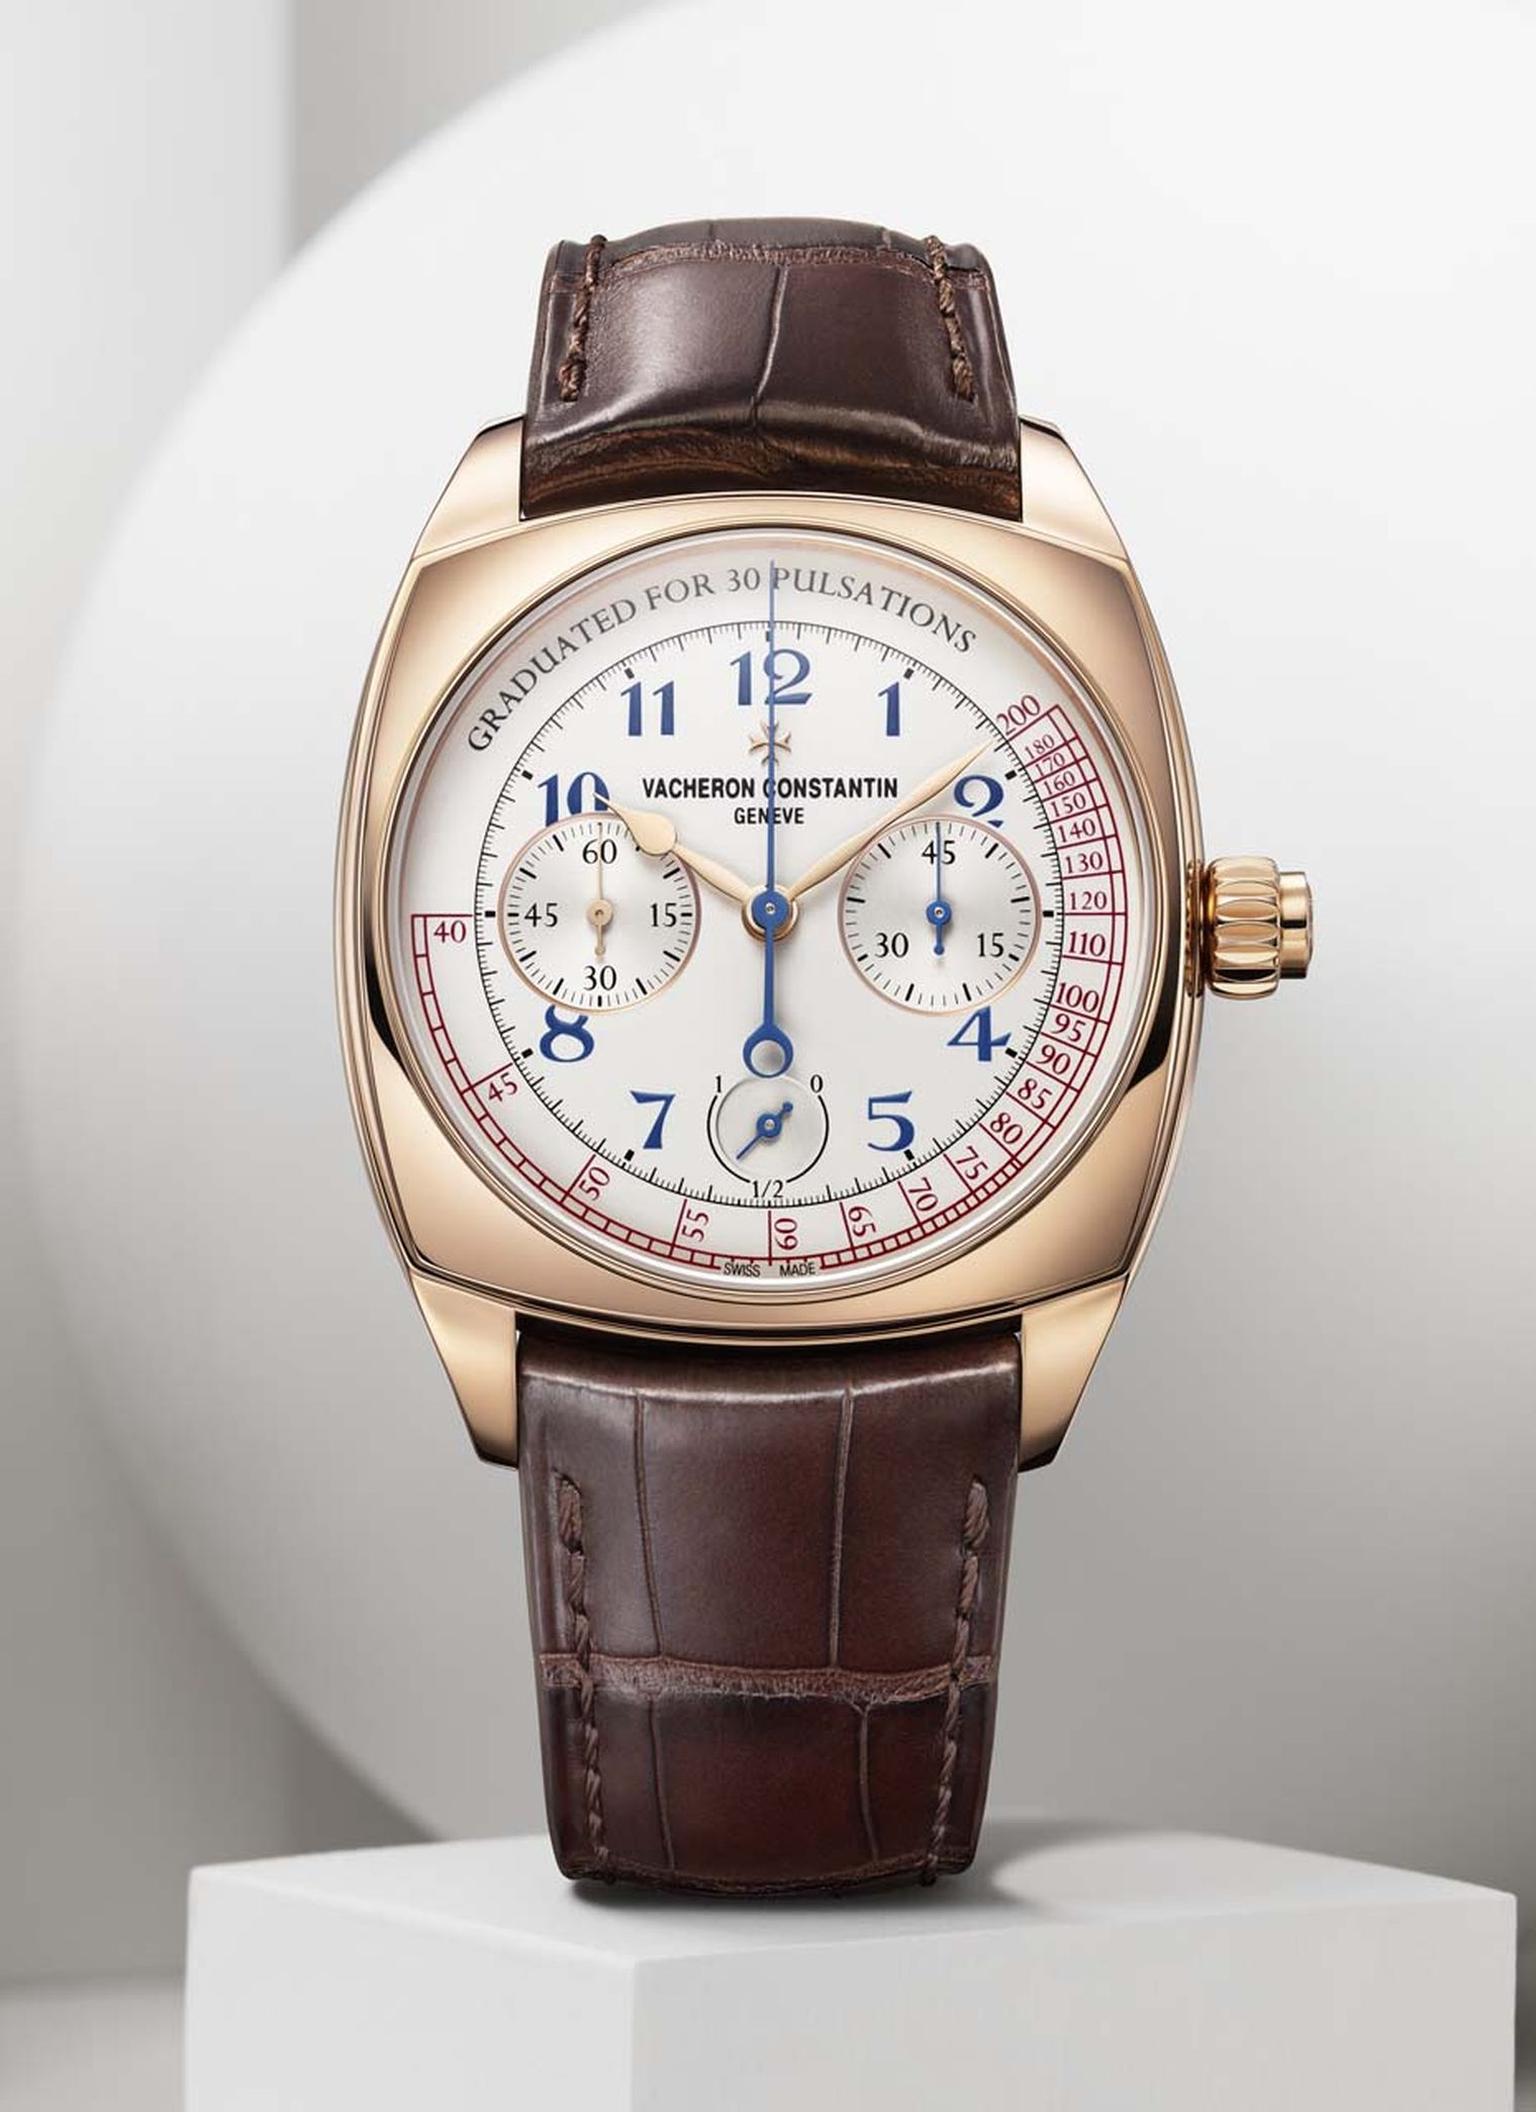 The Vacheron Constantin Harmony Chronograph calibre 3300 is a contemporary incarnation of a 1928 Vacheron doctor's watch. The new Harmony collection was presented in 2015 to celebrate the Maison's 260th anniversary.